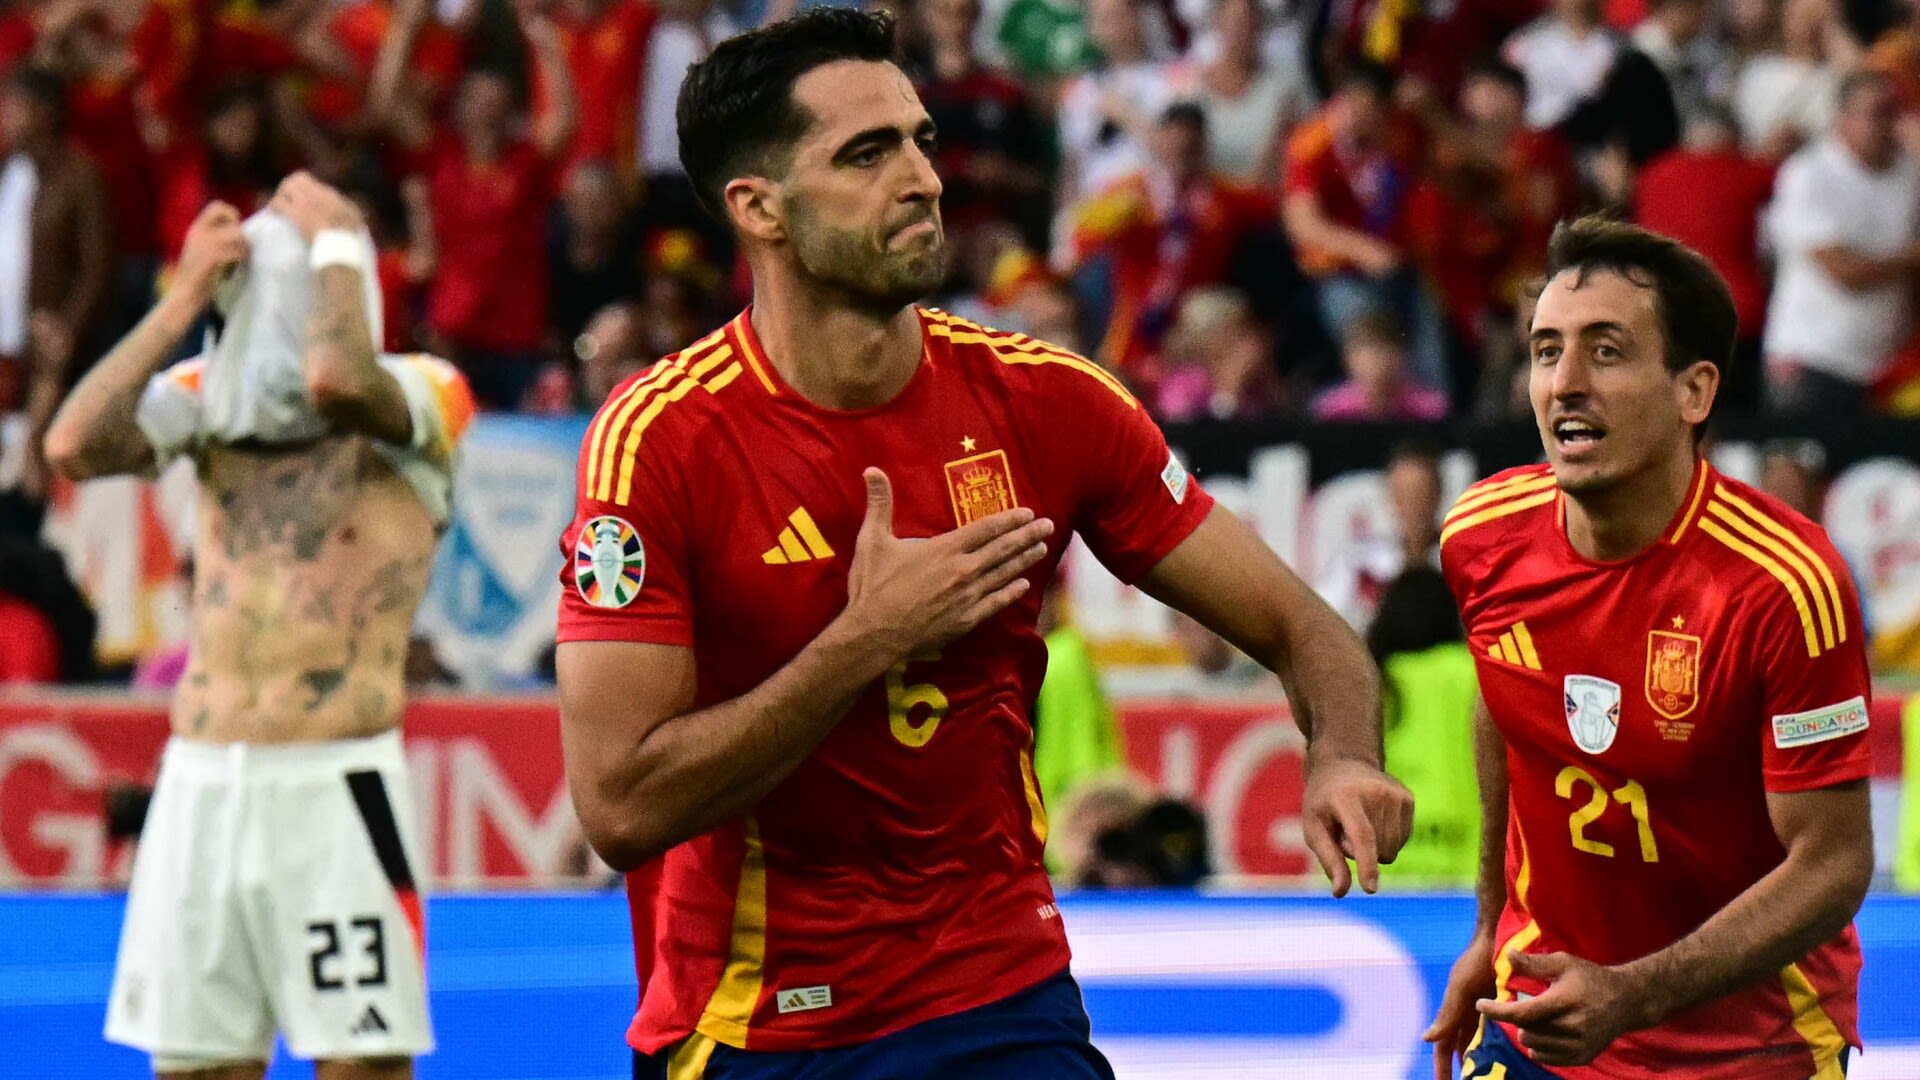 Spain 2-1 Germany: Merino knocks out hosts in extra time